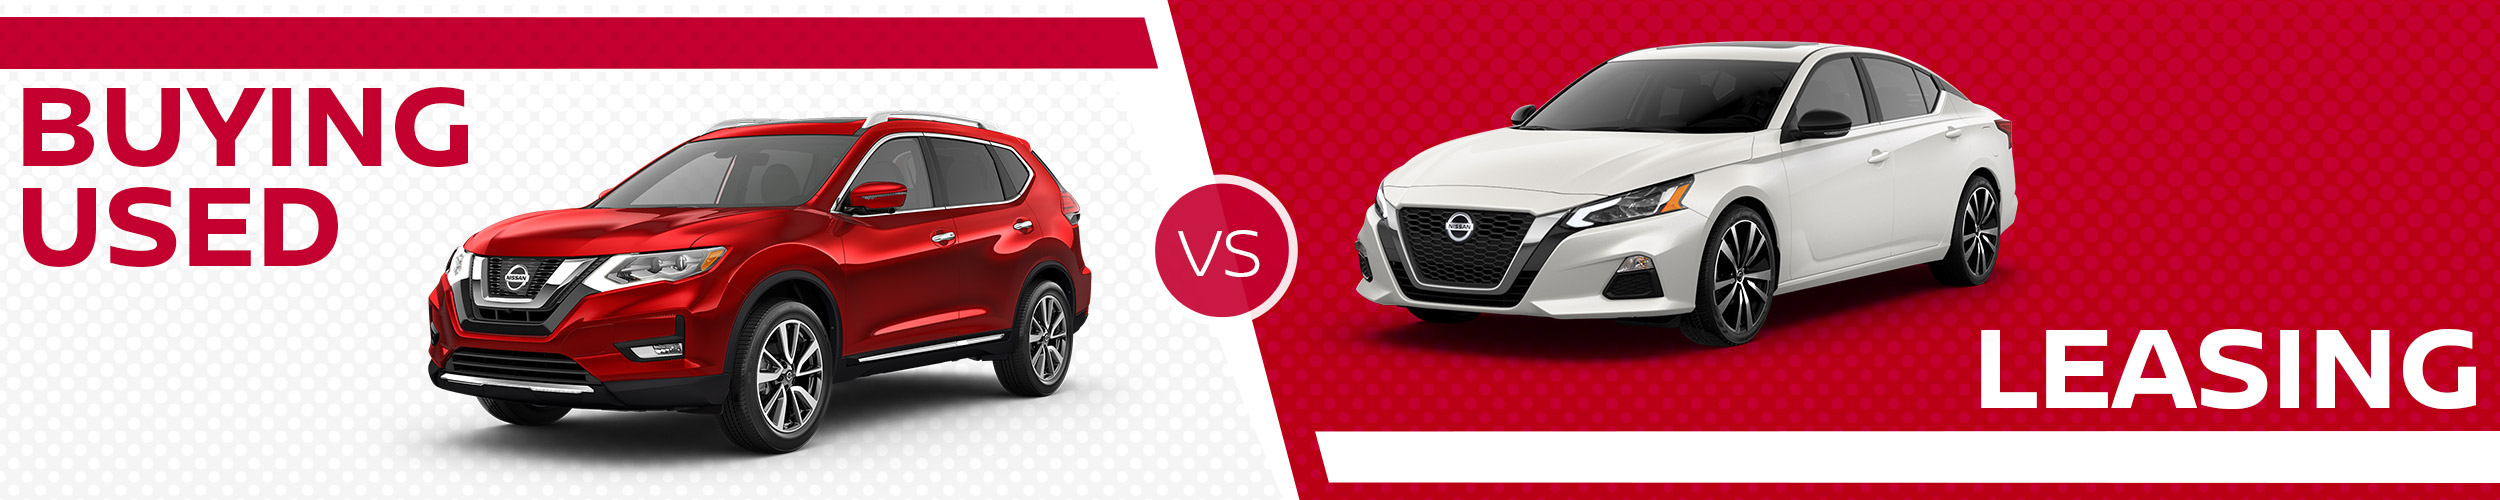 Buying Used vs. Leasing | Galesburg Nissan | Galesburg, IL